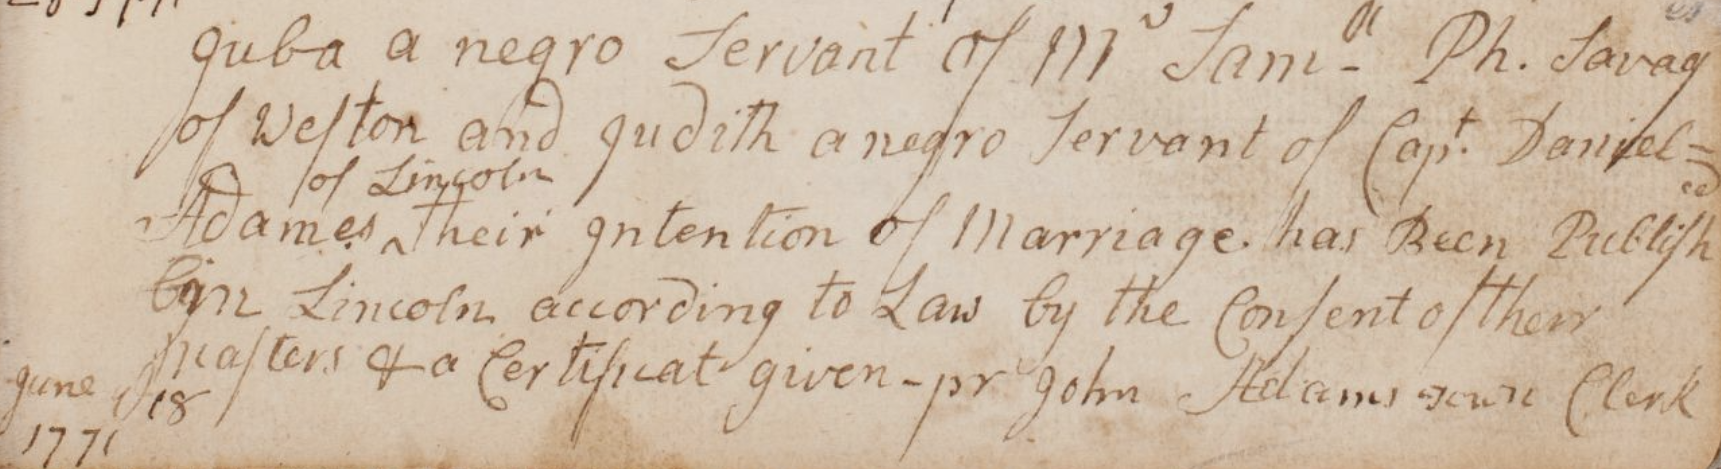 Jube Savage intention of Marriage document, June 18, 1771,  Lincoln Vital Records